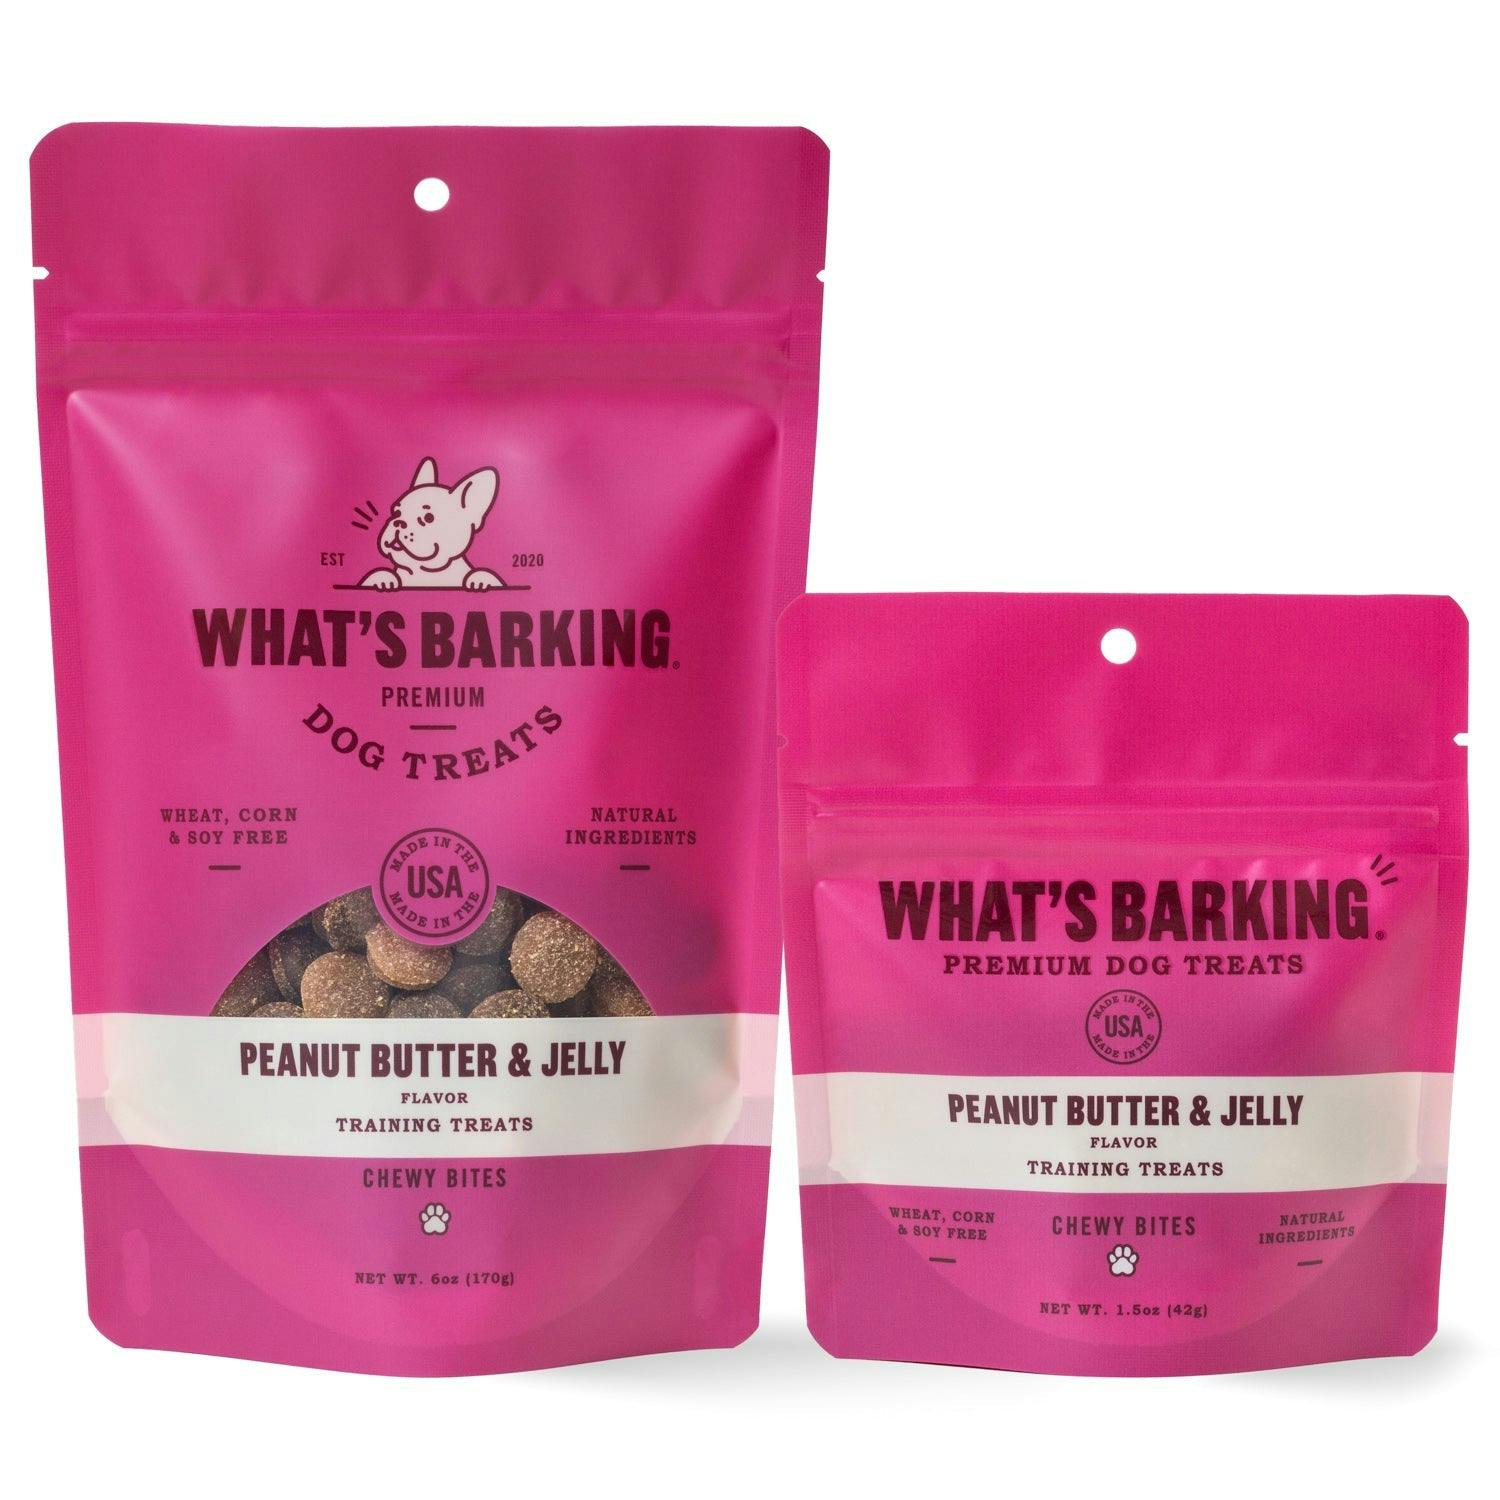 What's Barking Peanut Butter & Jelly Chewy Training Treats - Image 1